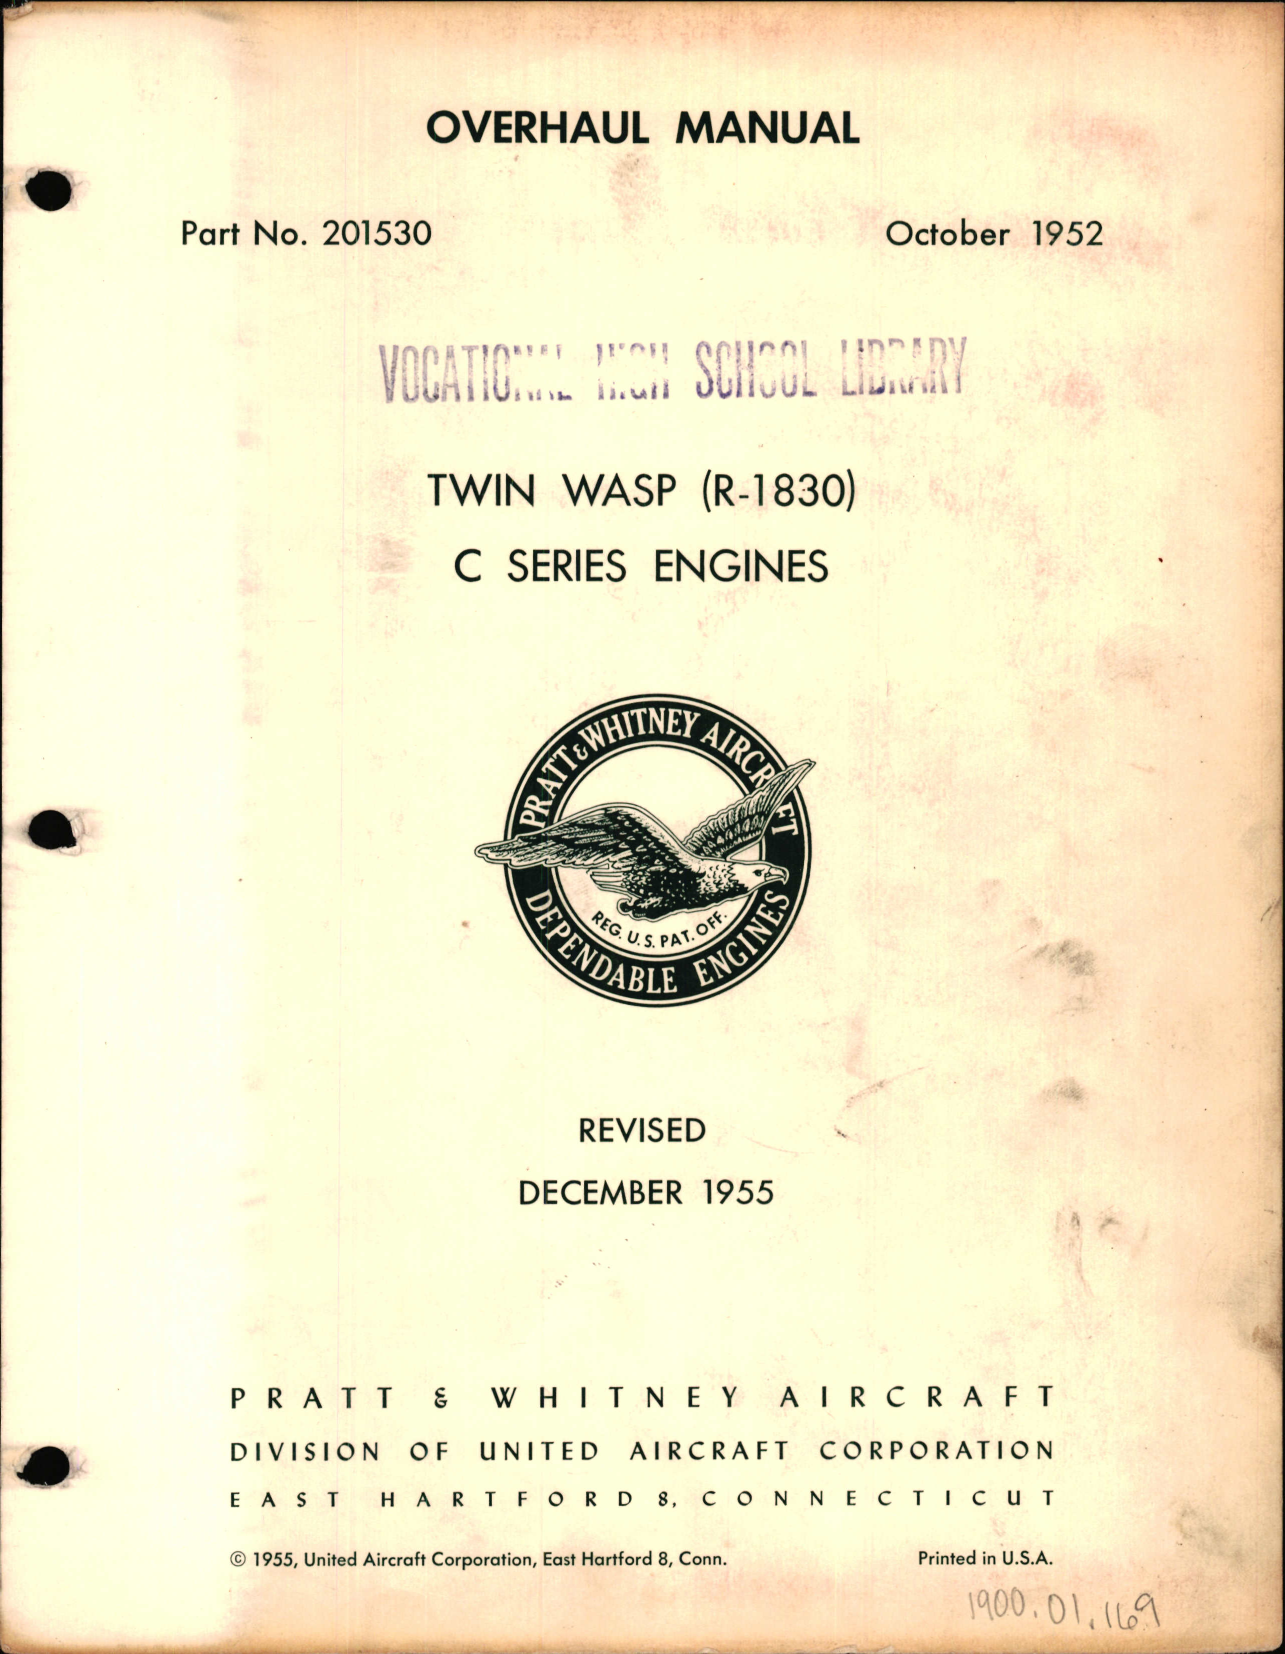 Sample page 1 from AirCorps Library document: Overhaul Manual for Twin Wasp R-1830 C Series Engines